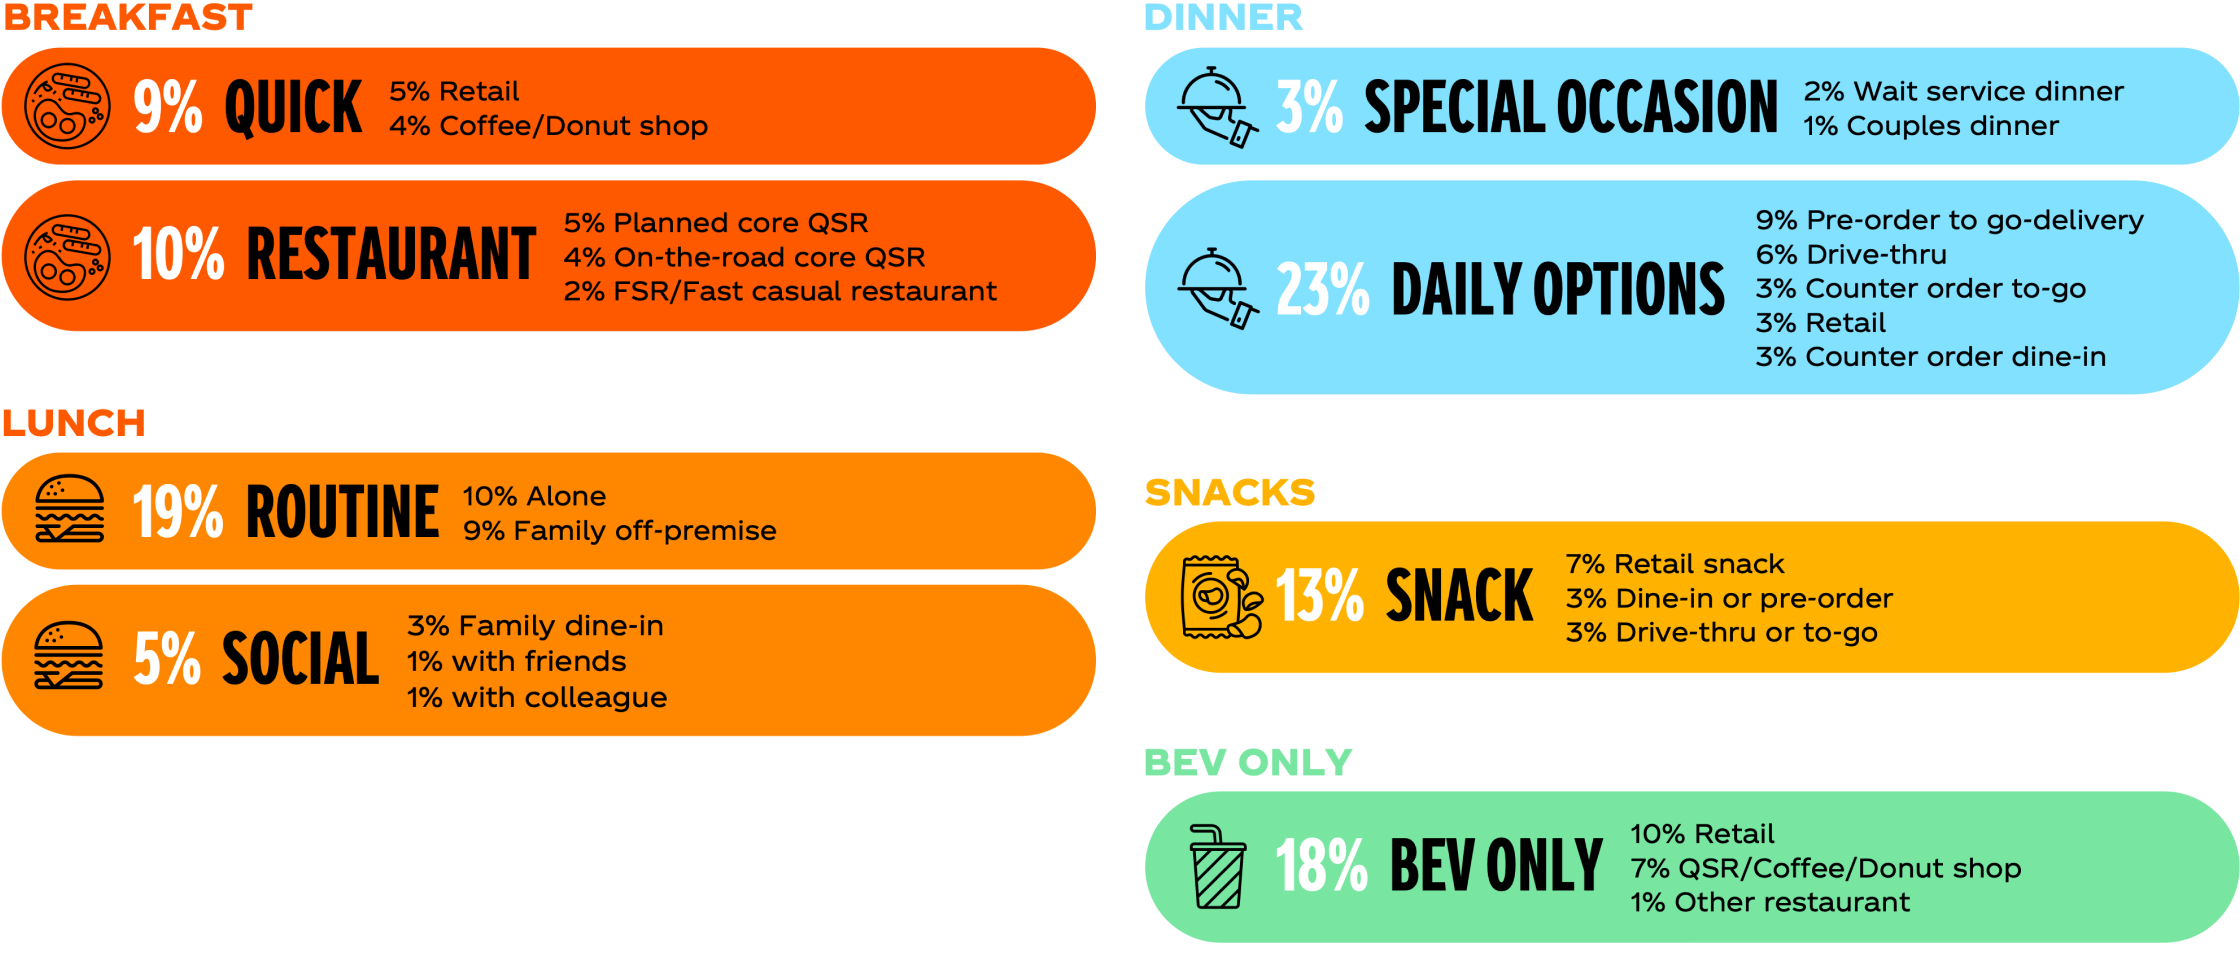 Infographic showing percentages associated with the aforementioned segments: Quick (9%), Restaurant (10%), Routine (19%), Social (5%), Special Occasion (3%), Daily Options (23%), Snack (13%), and Bev Only (18%).